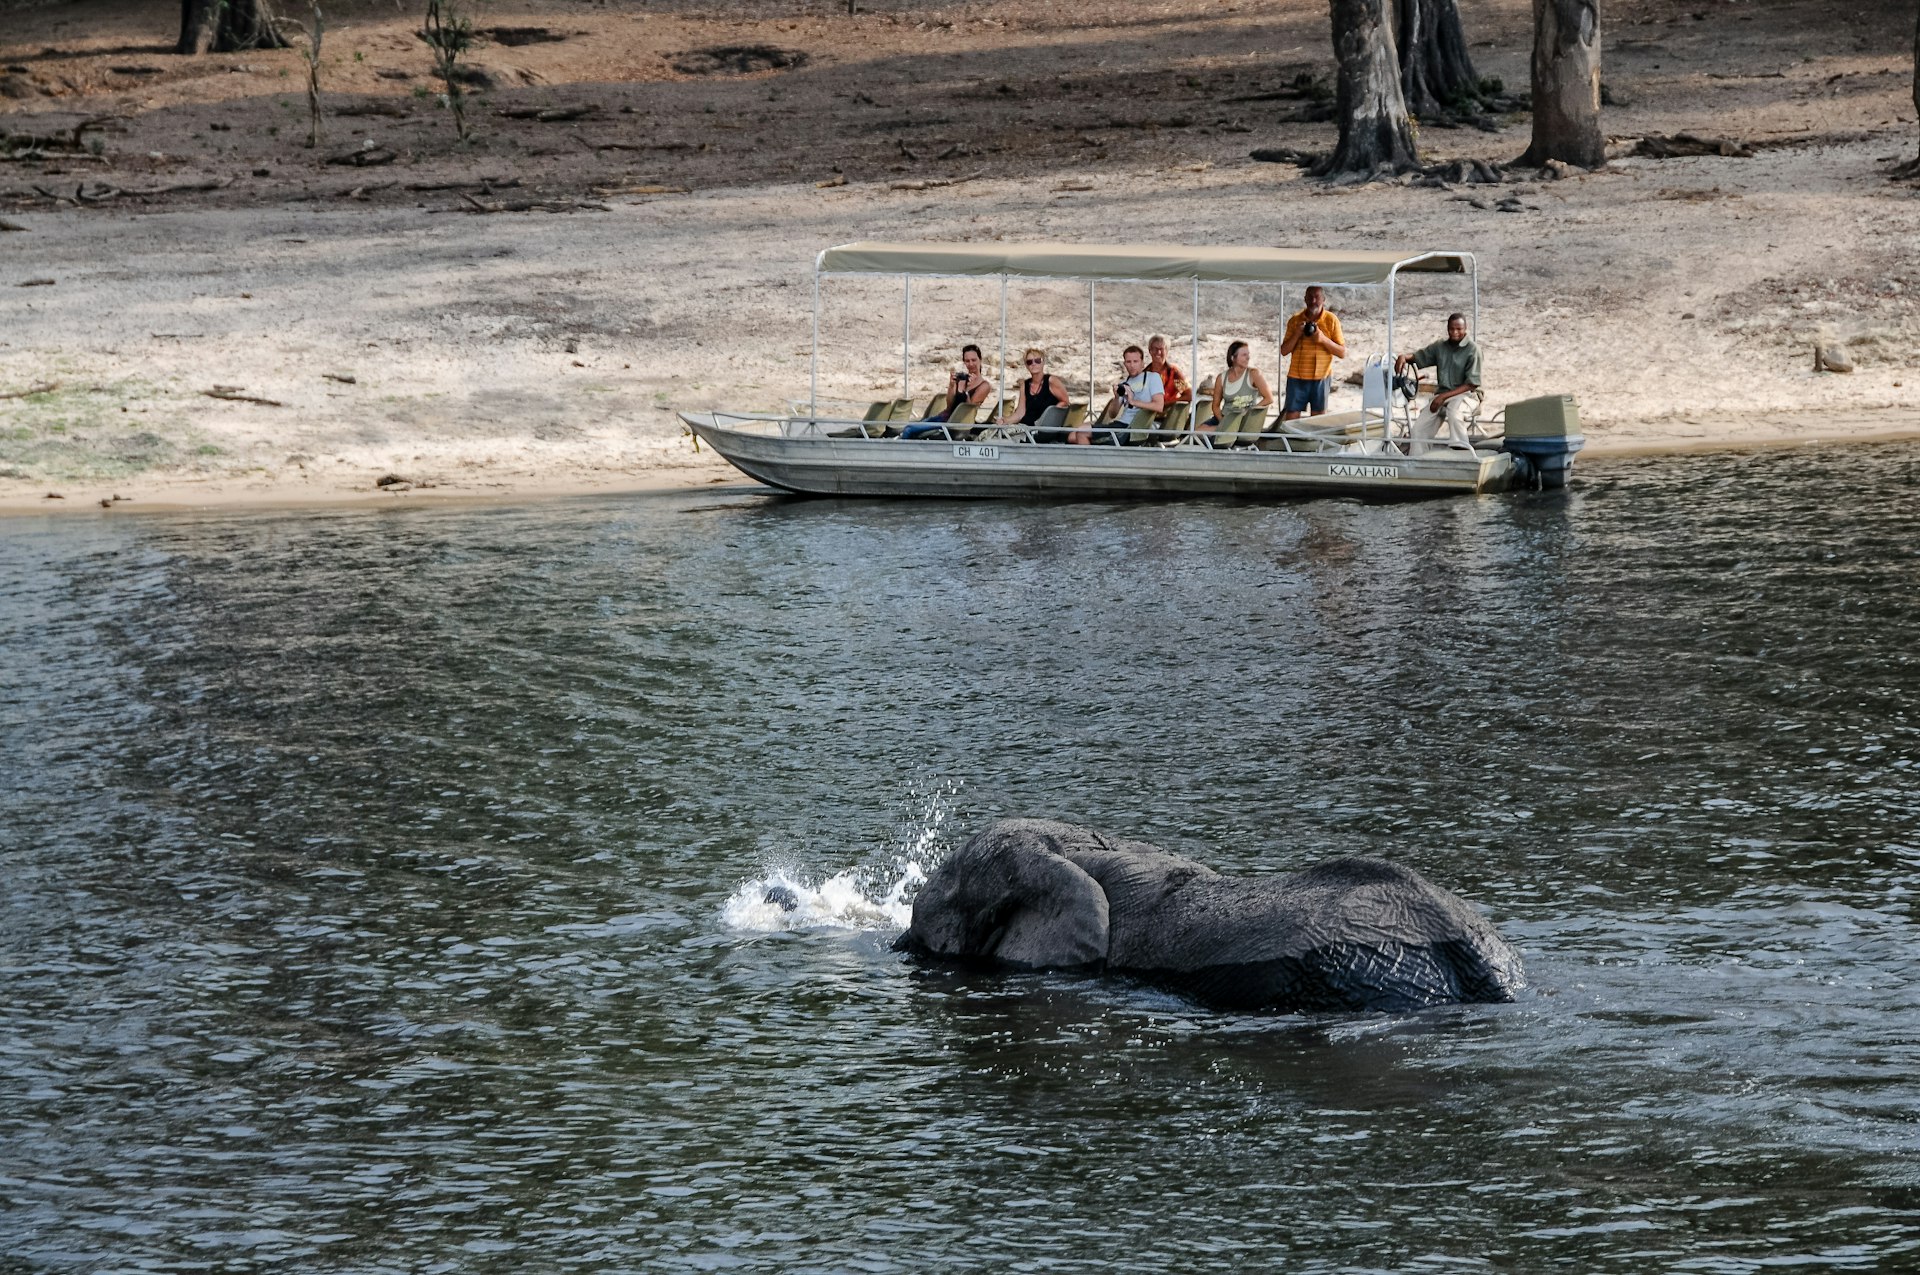 Elephant crosses the Chobe River as a safari tour in a boat looks on